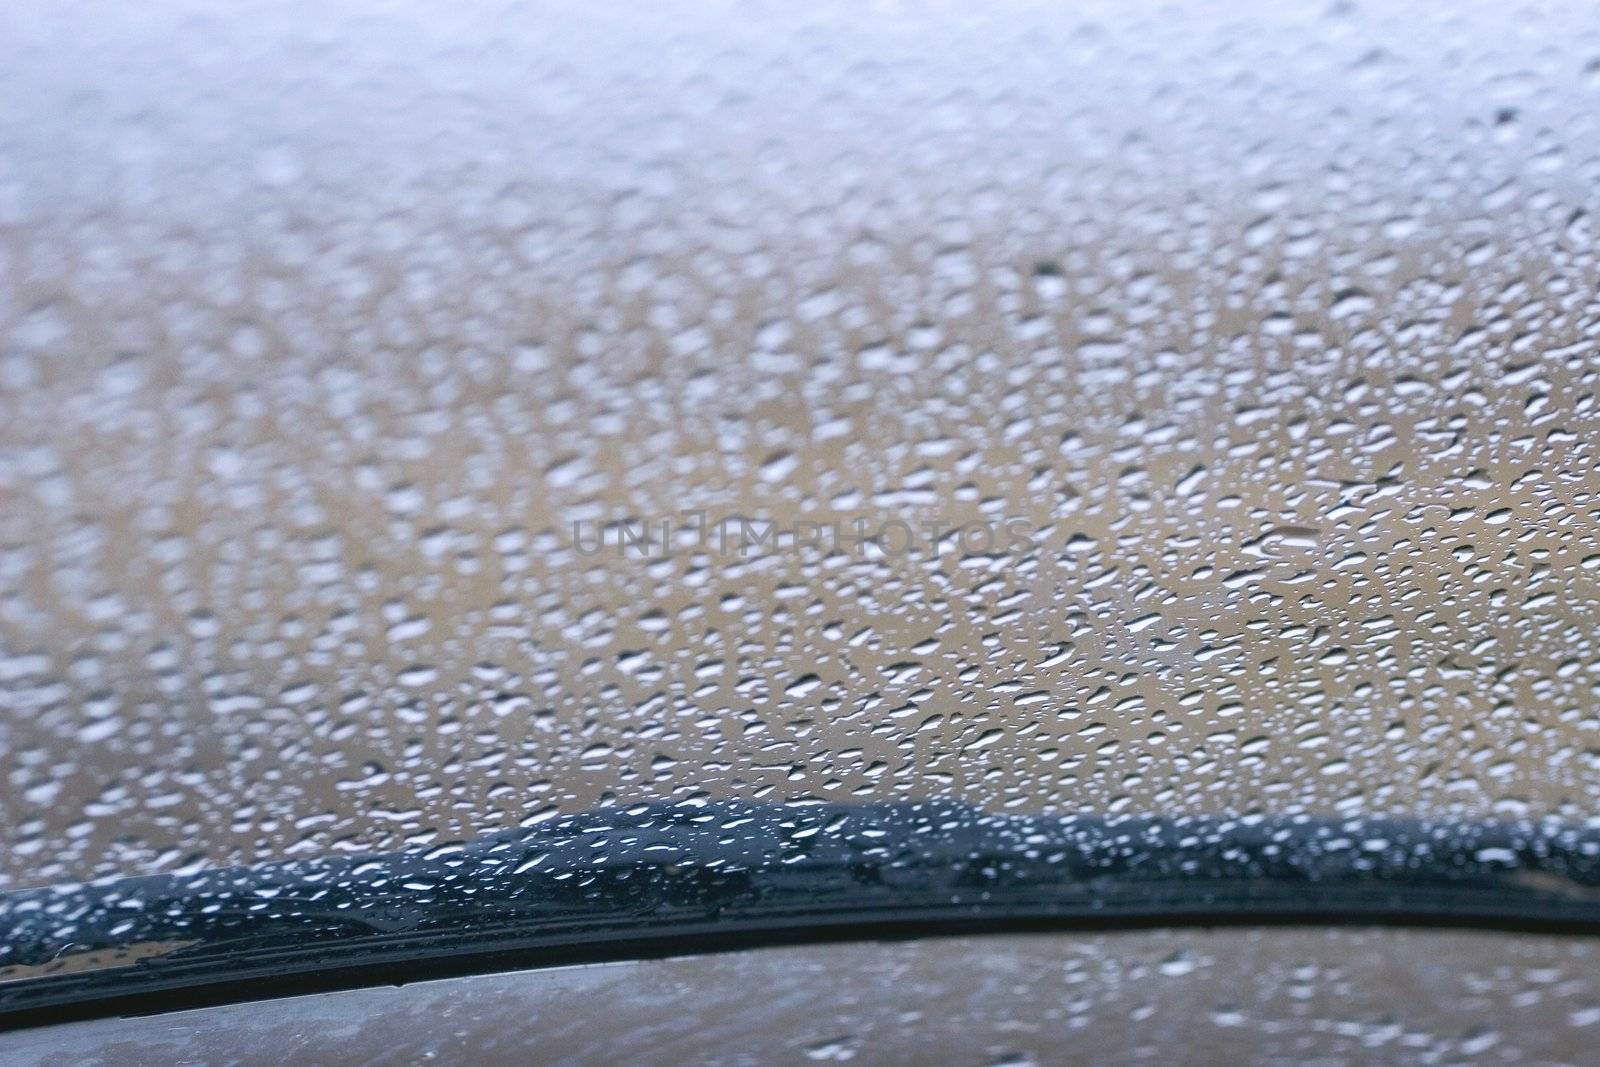 View of rain on a windshield with a wiper blade from the inside